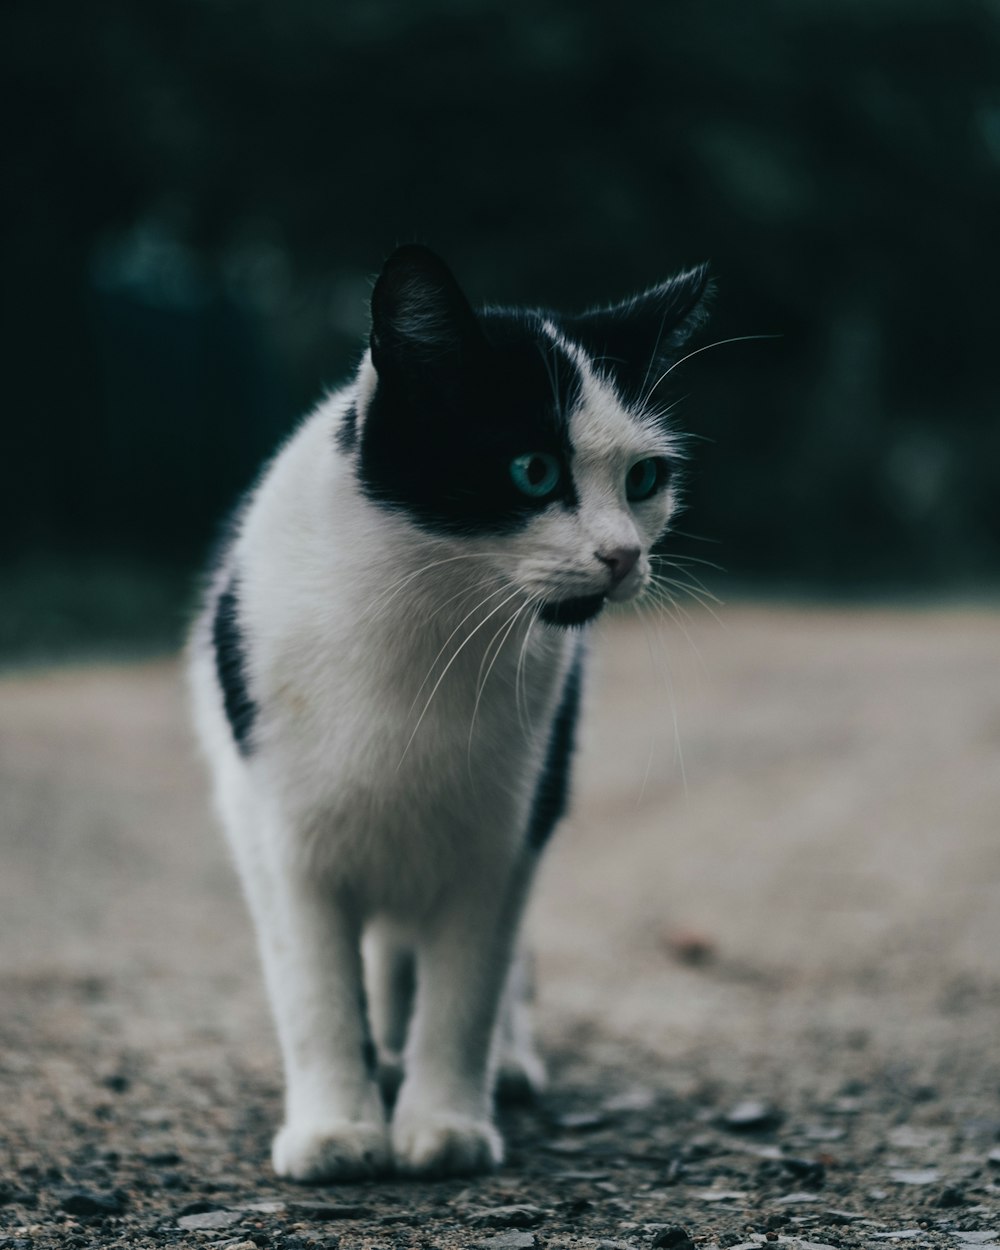 white and black cat on brown soil